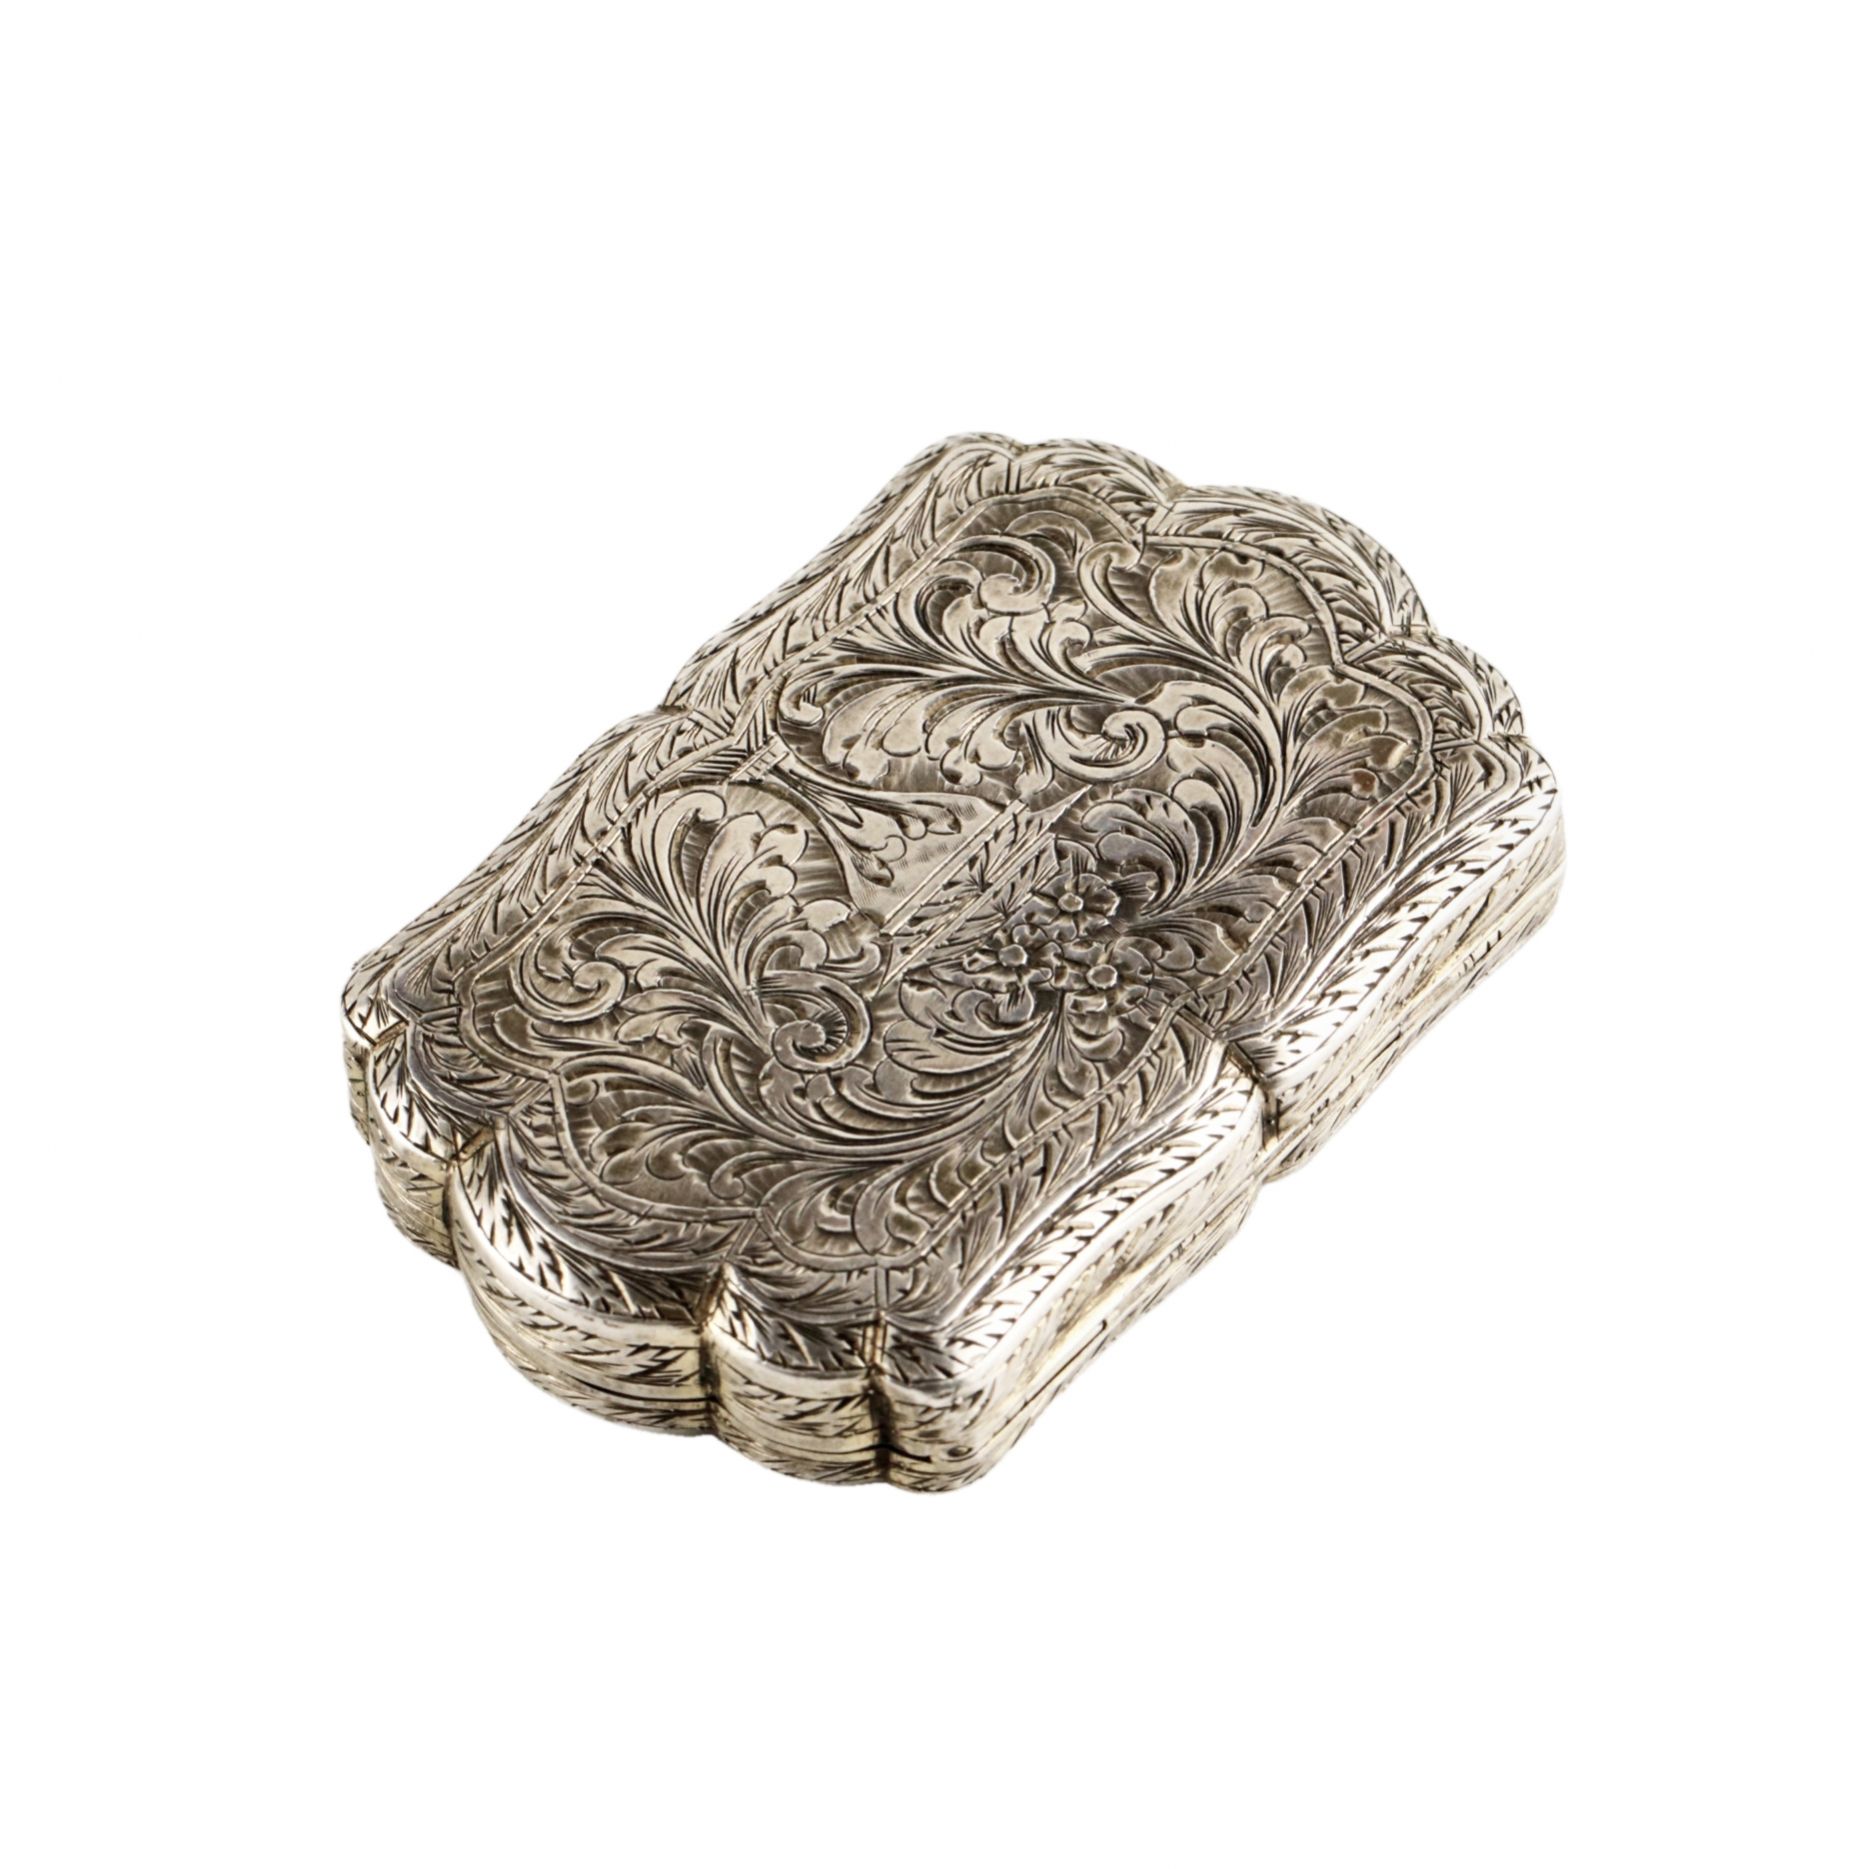 Silver snuffbox. - Image 5 of 9